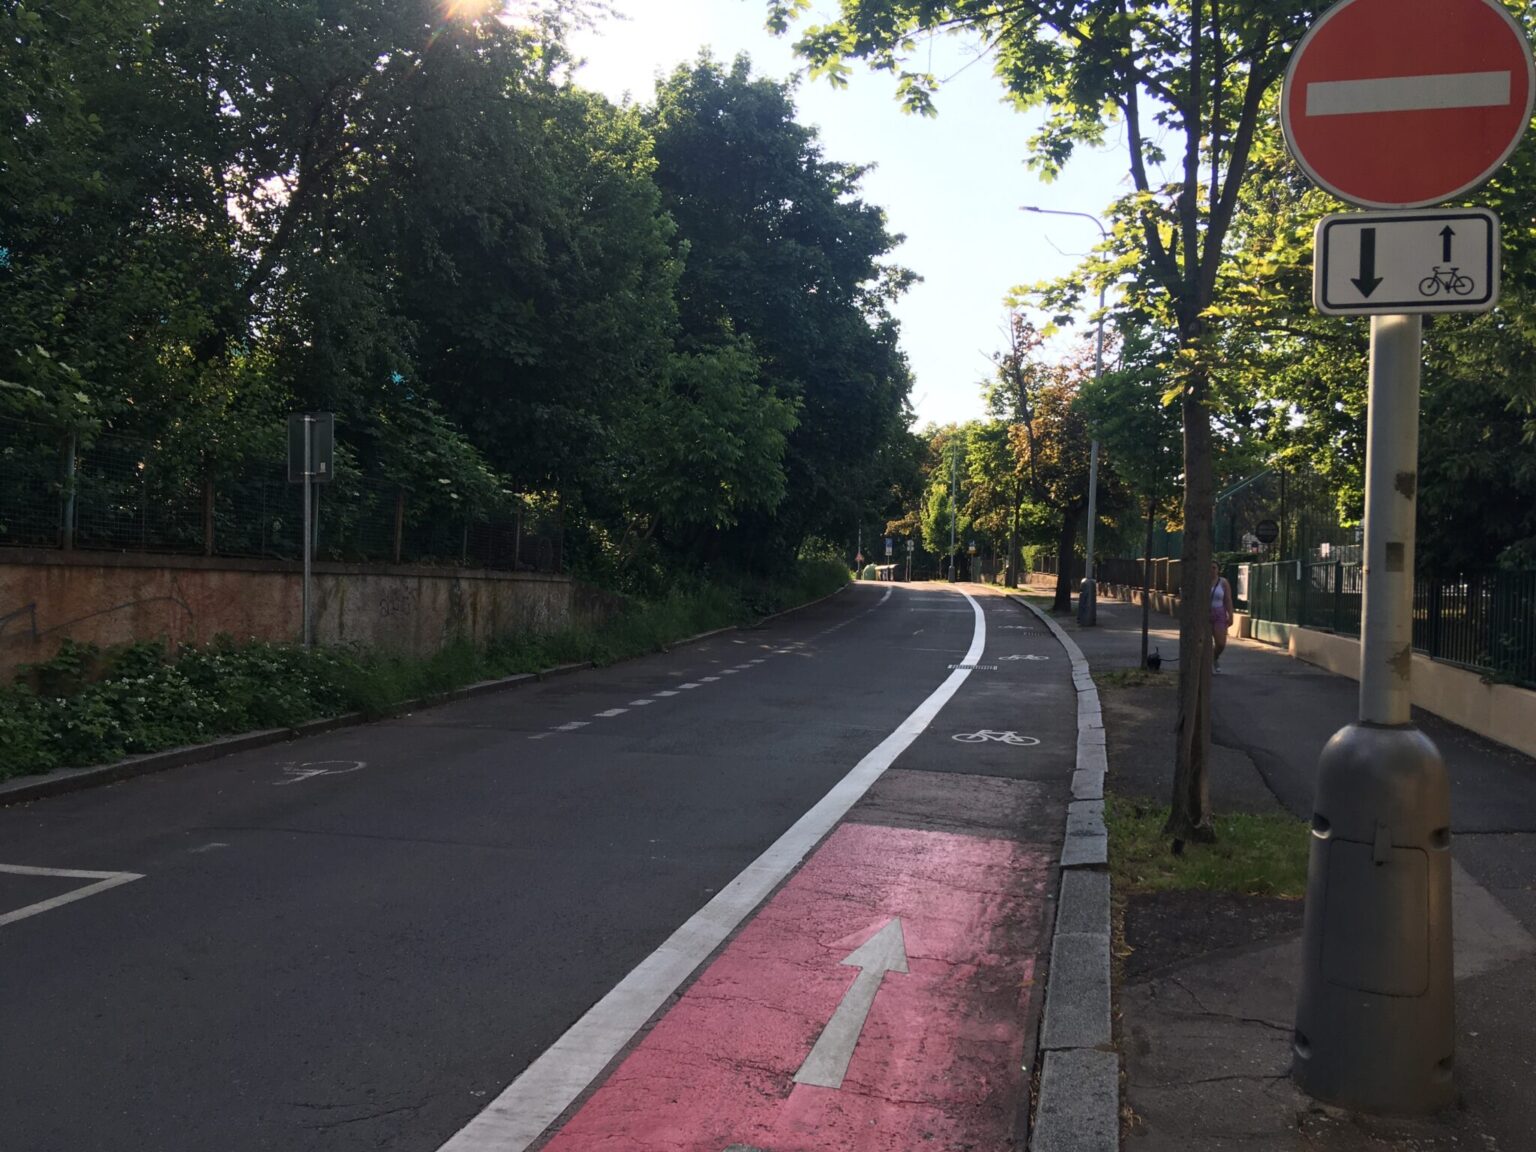 In recent years, Prague has renewed the horizontal markings of this long-standing contraflow bicycle lane. Additional supplementary signs were also added according to the current ordinance. Zdroj: Jiří Motýl